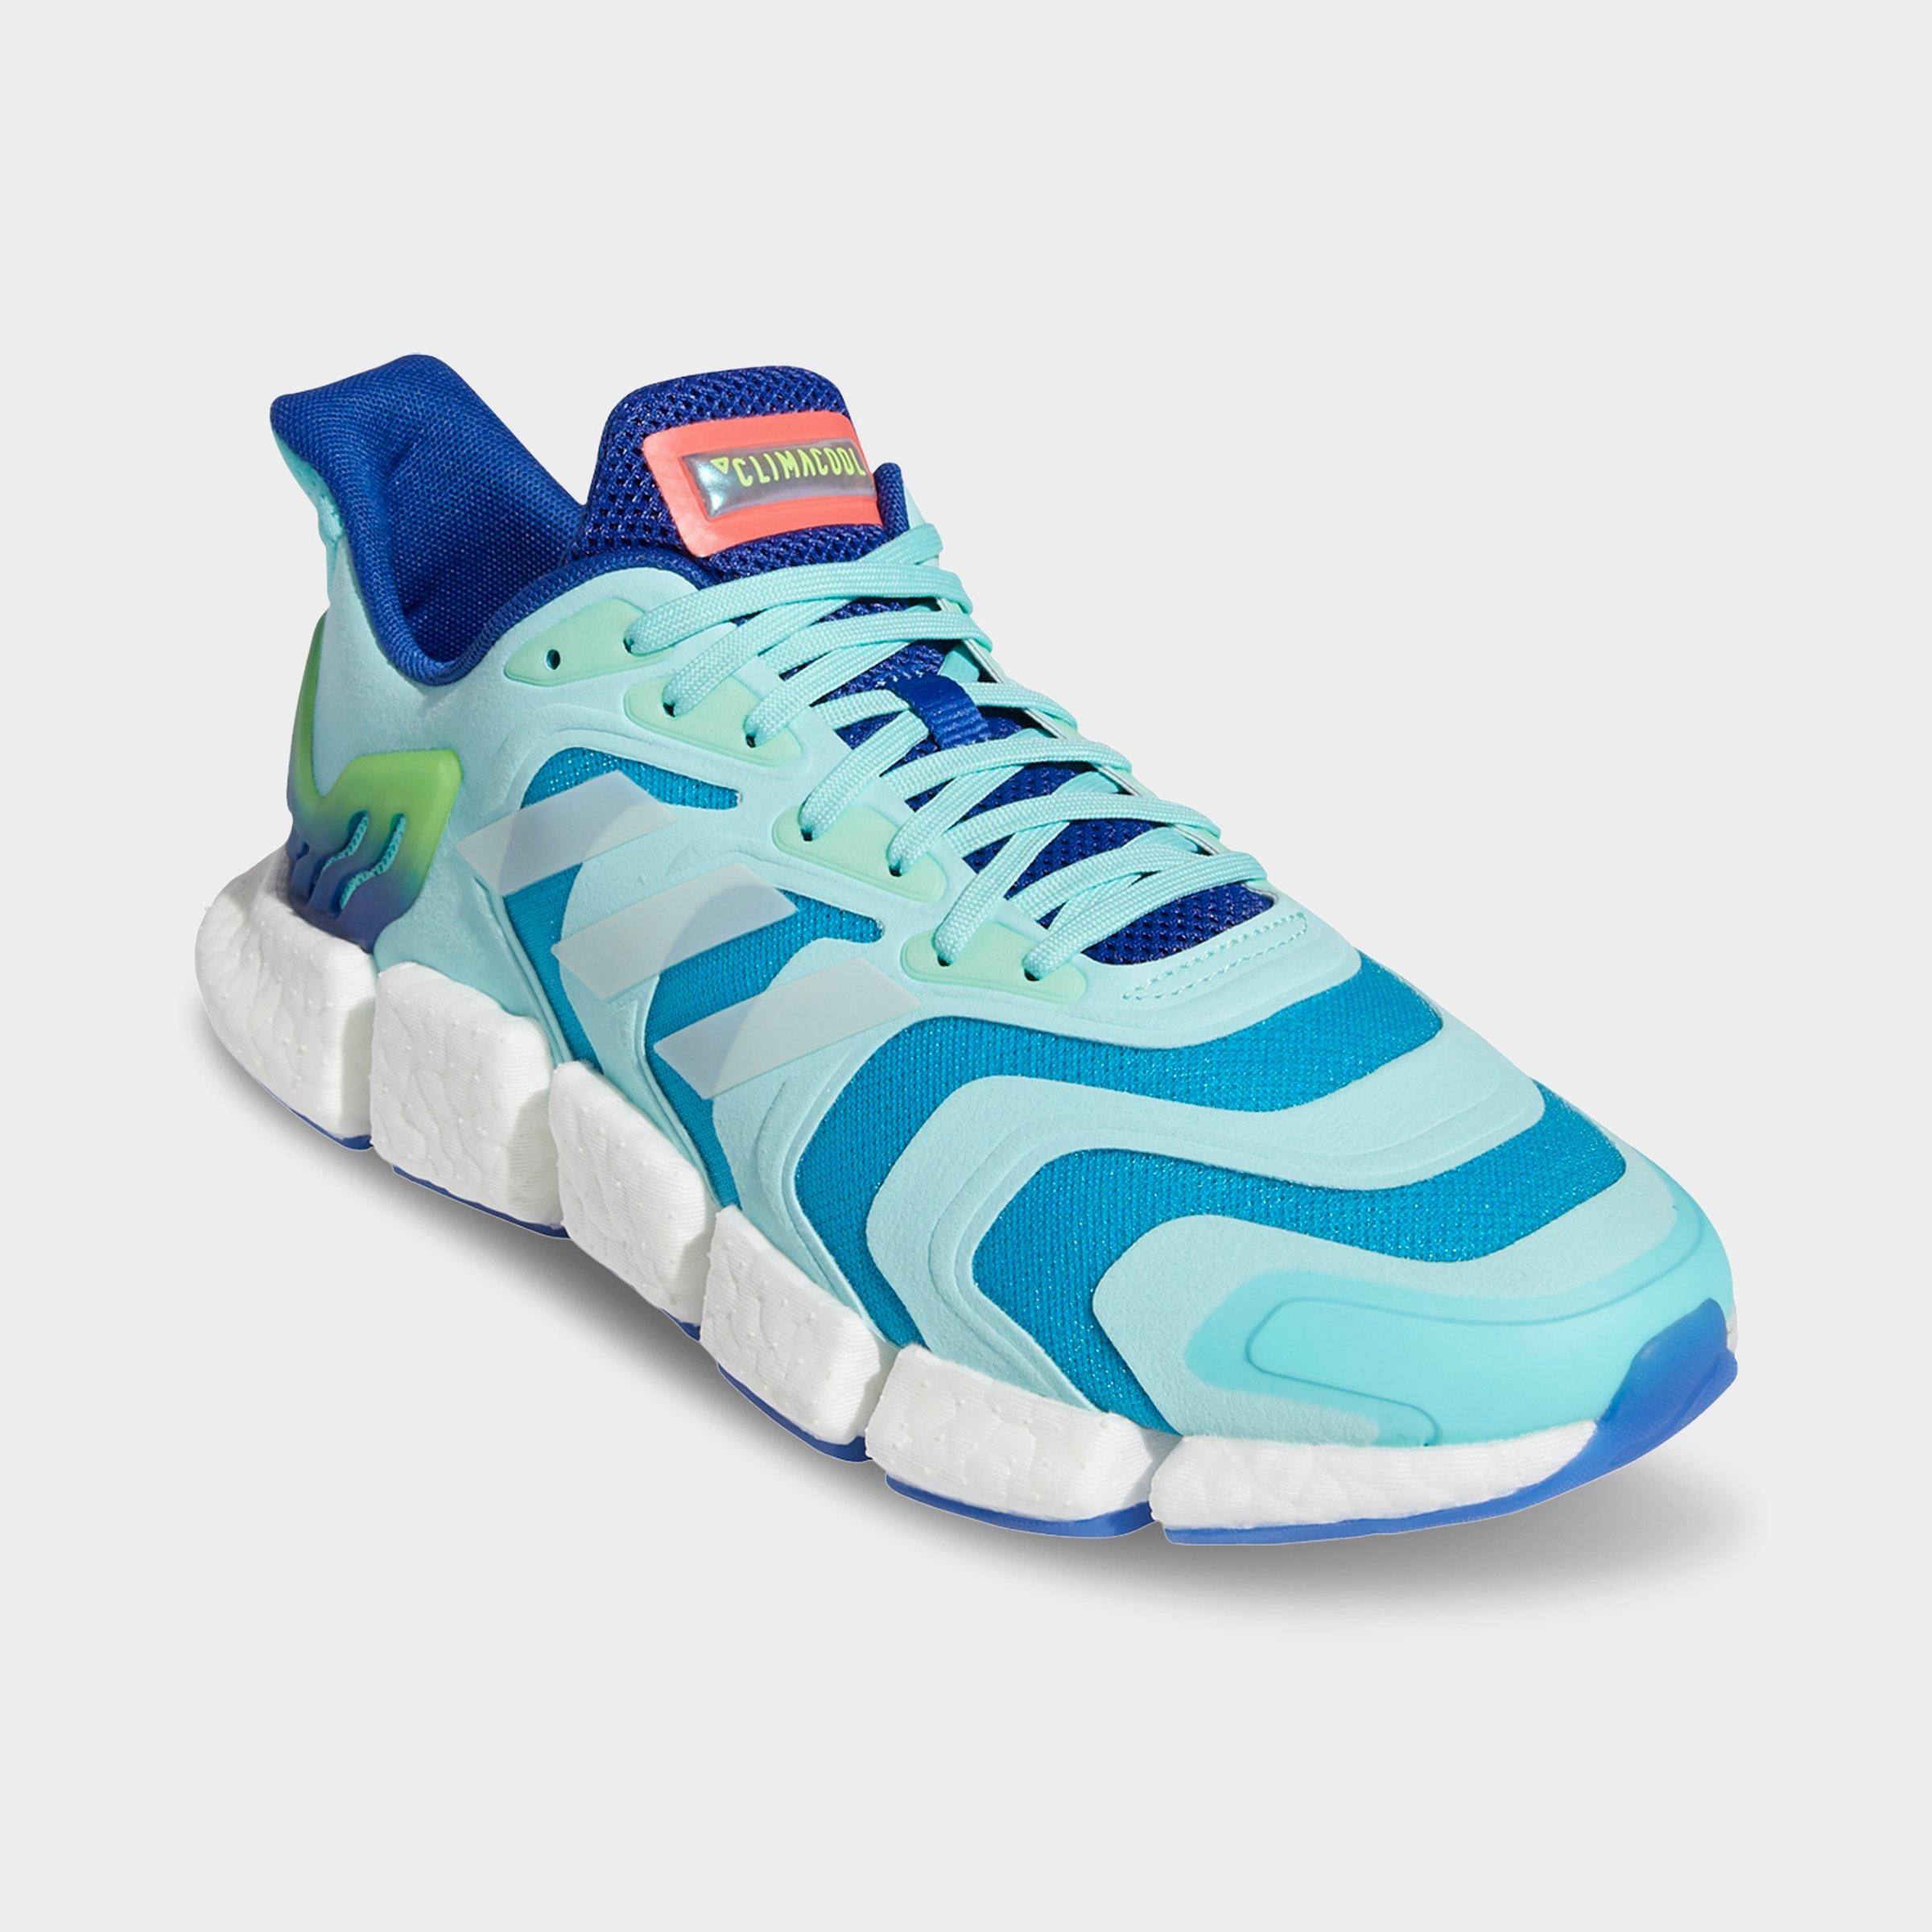 adidas climacool running sneakers